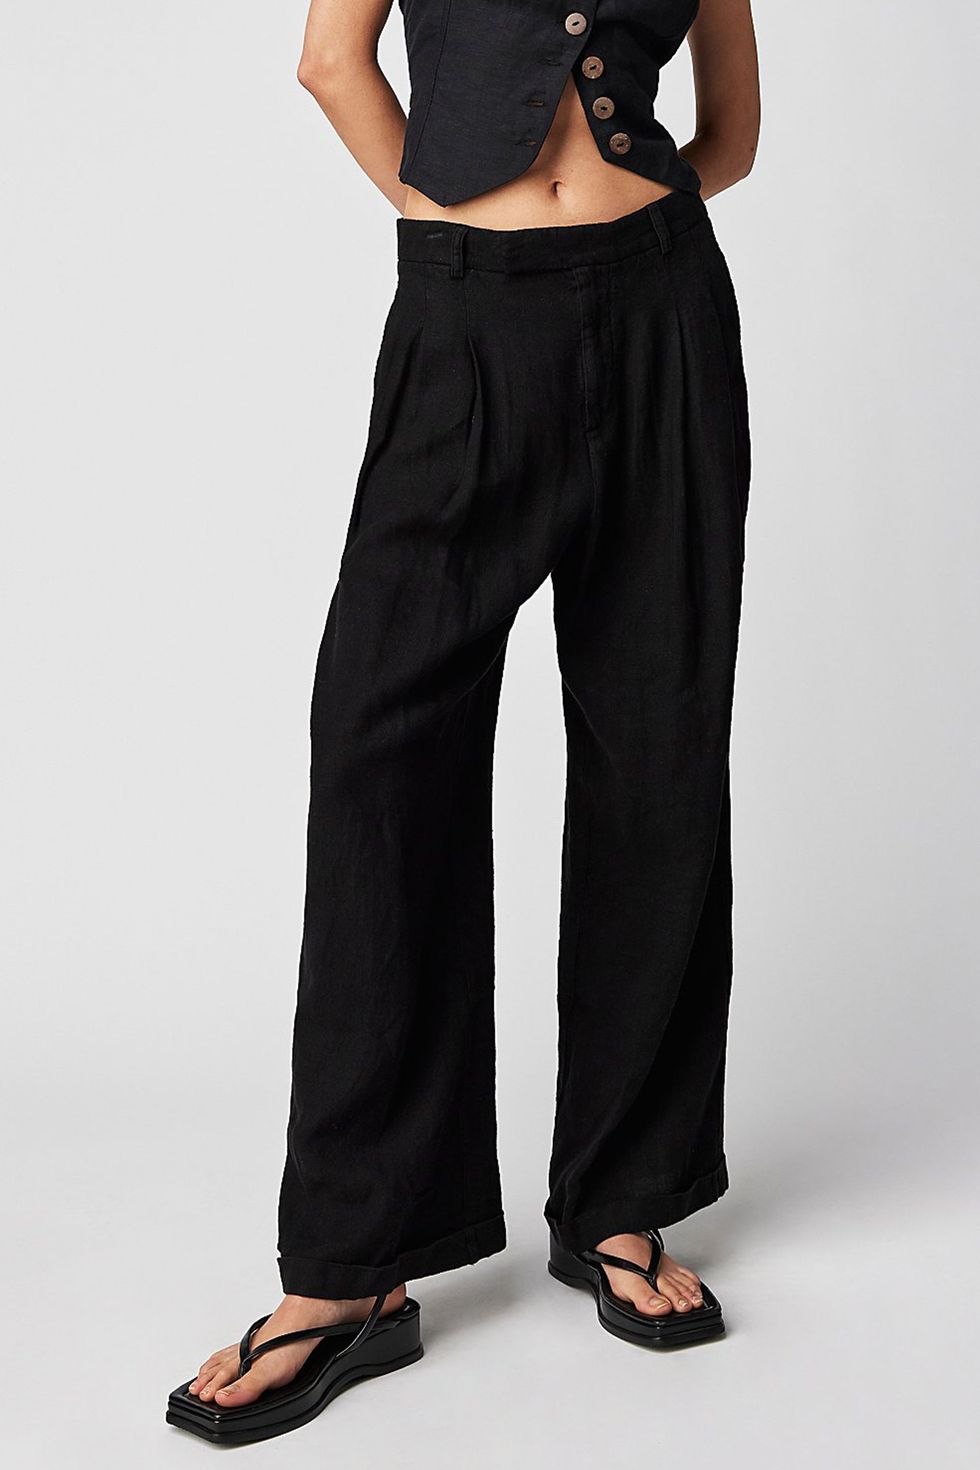 Buy Black Trousers & Pants for Women by FREEHAND Online